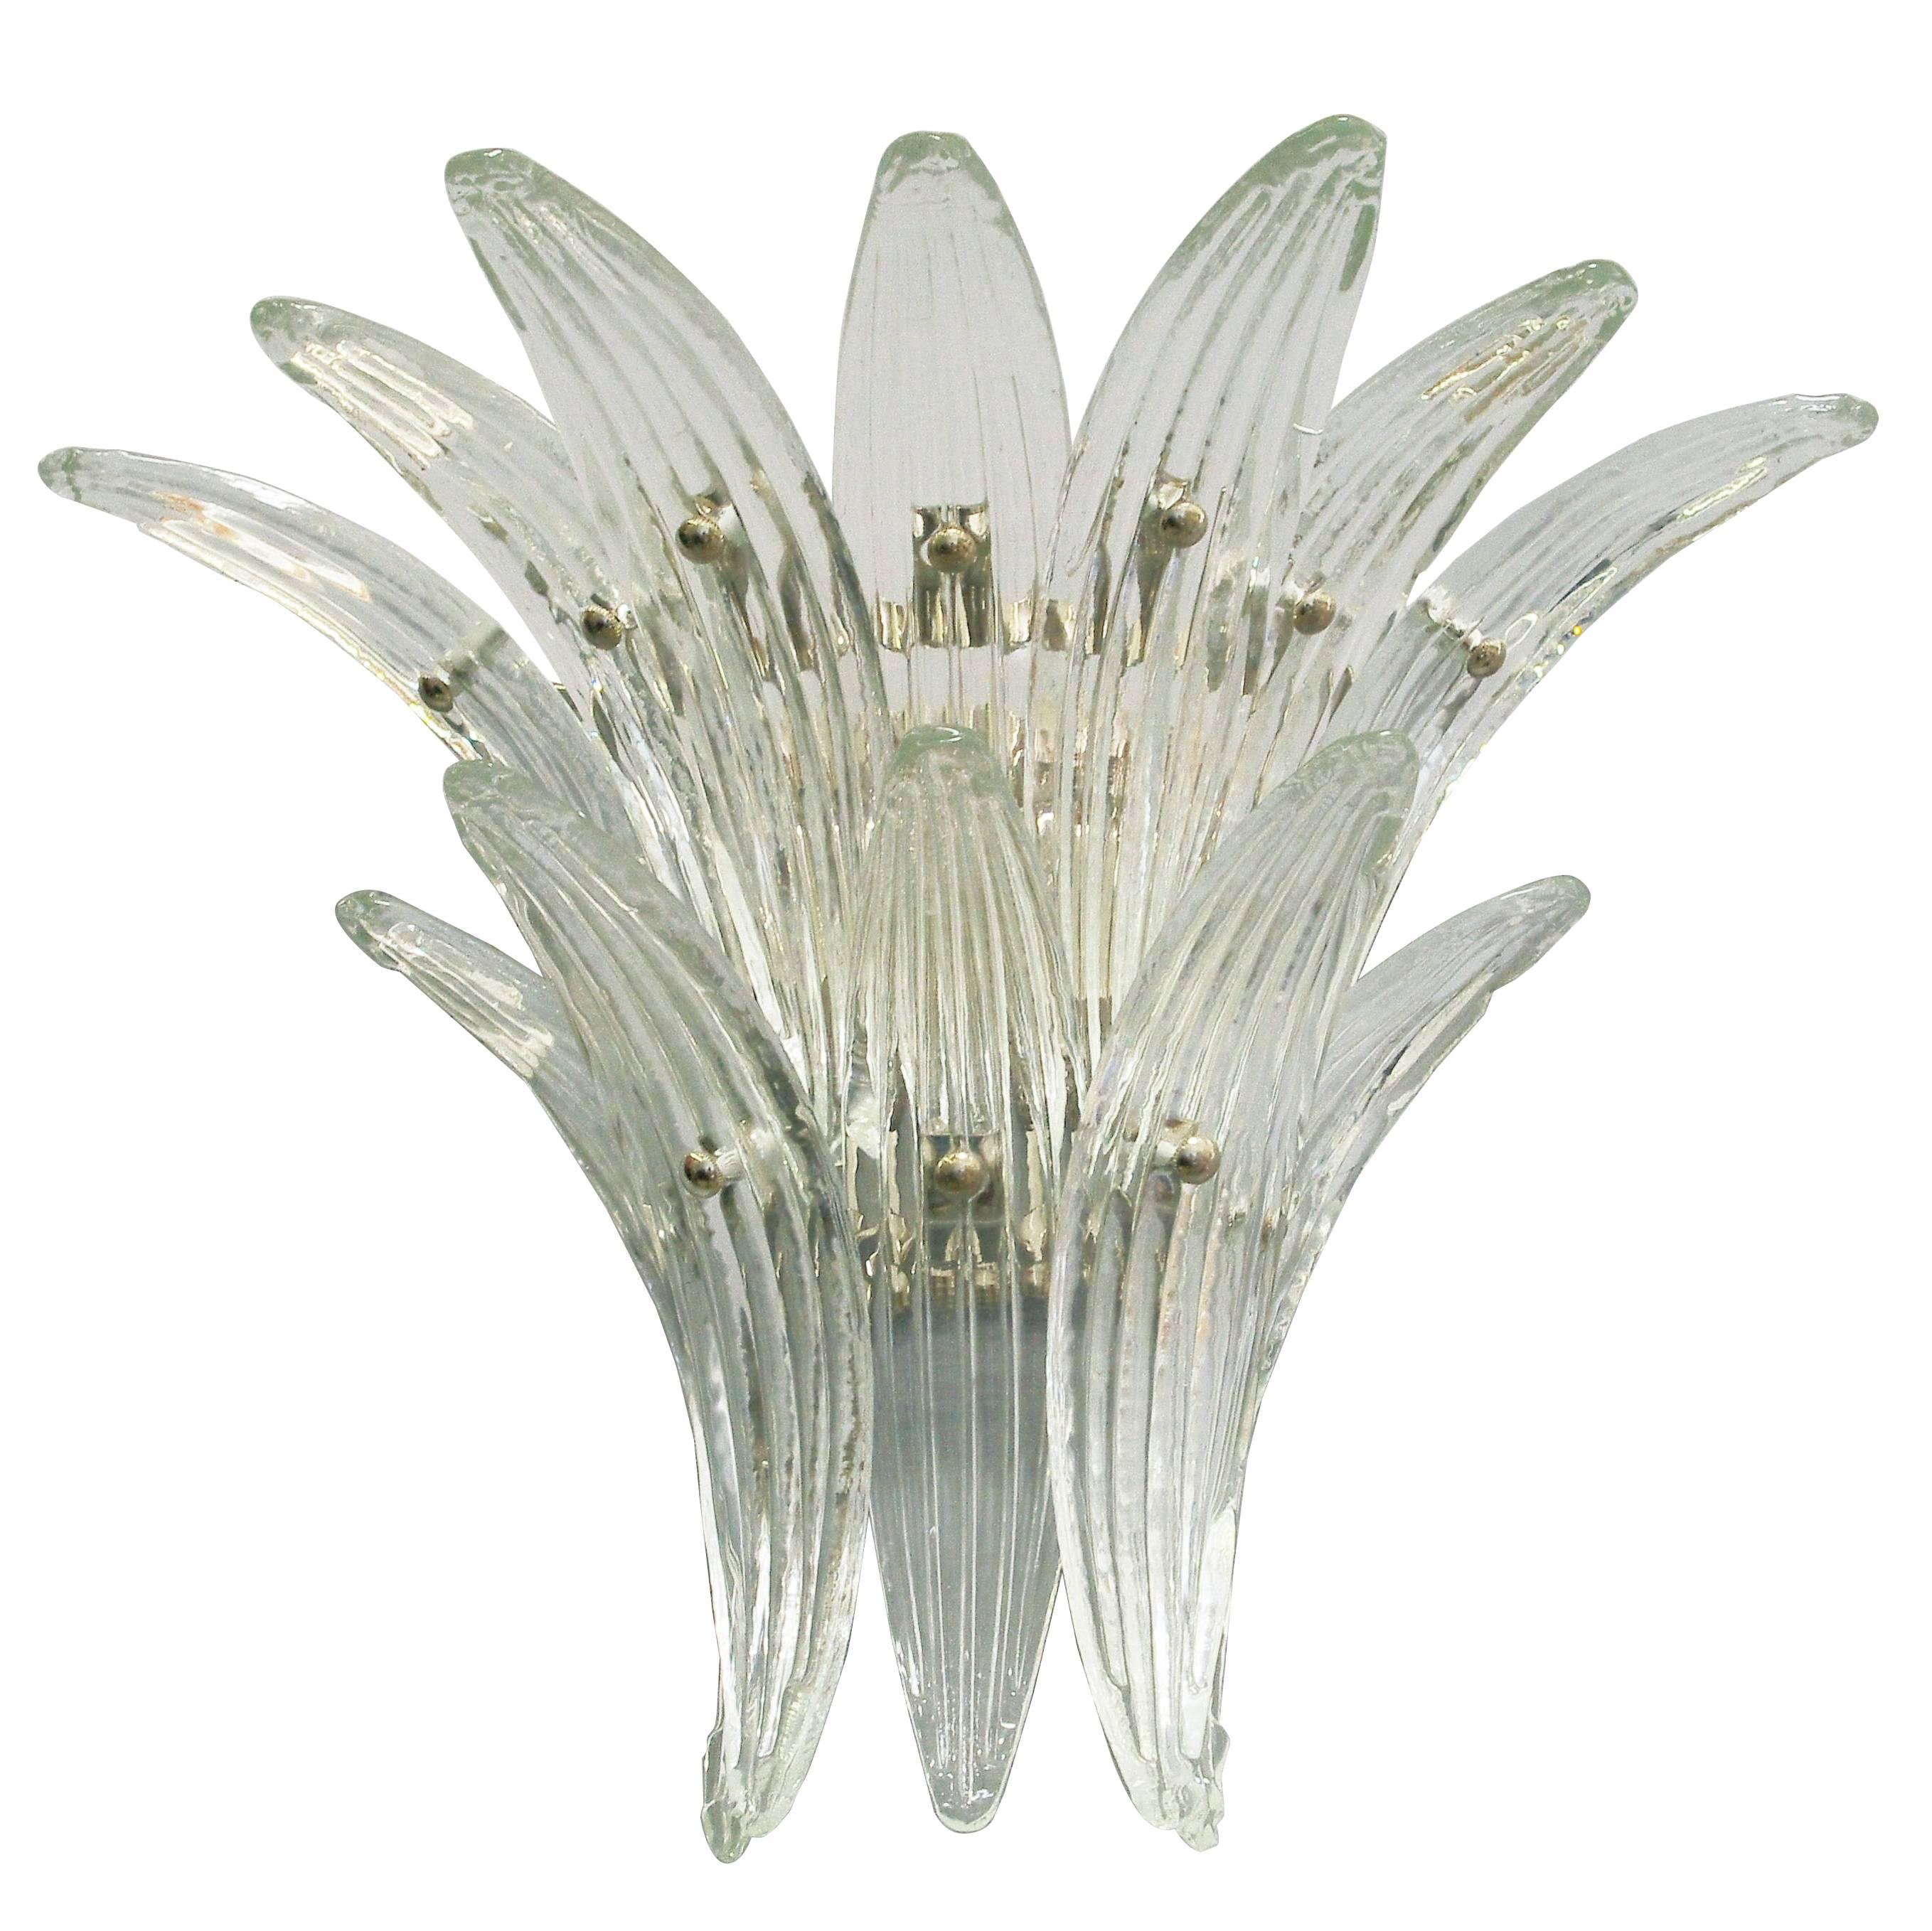 Italian Palmette wall light with 12 clear Murano glass leaves mounted on chrome finish metal frame by Fabio Ltd, made in Italy
2 lights / E12 or E14 type / max 40W each
Measures: Height 15 inches, width 19 inches, depth 9.5 inches
Order only, this